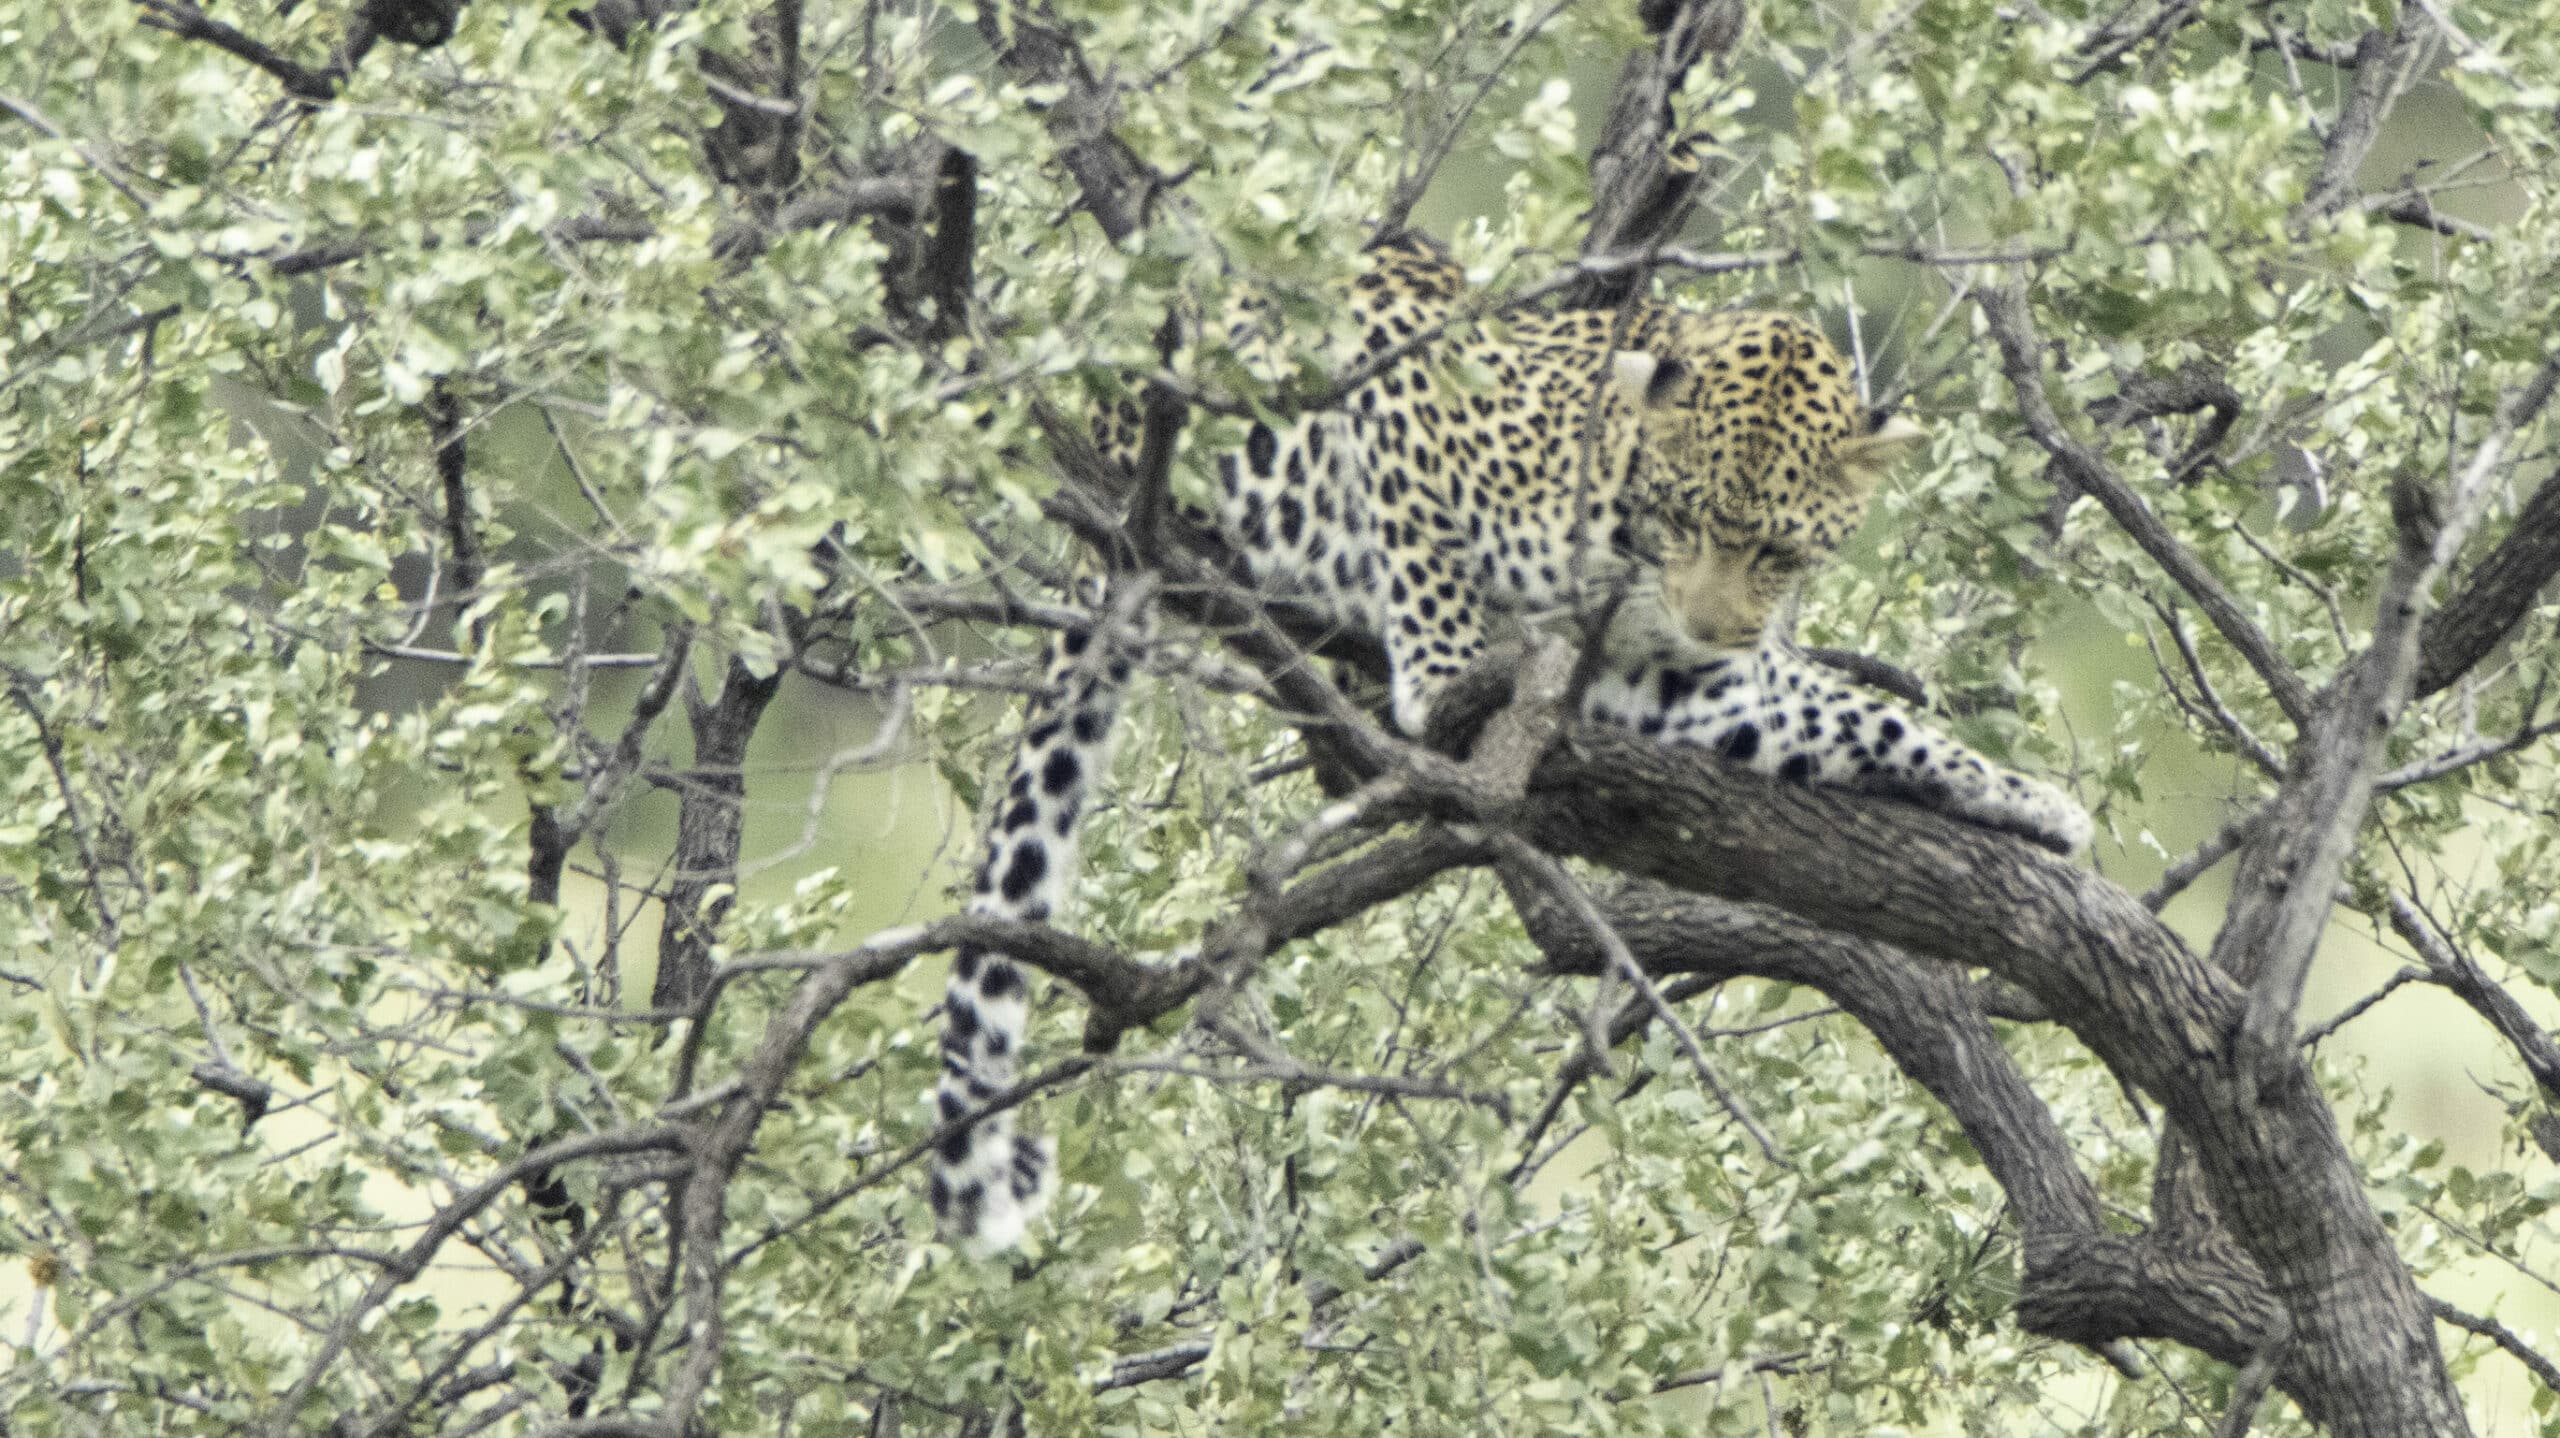 Leopard chased up a tree by hunting lions